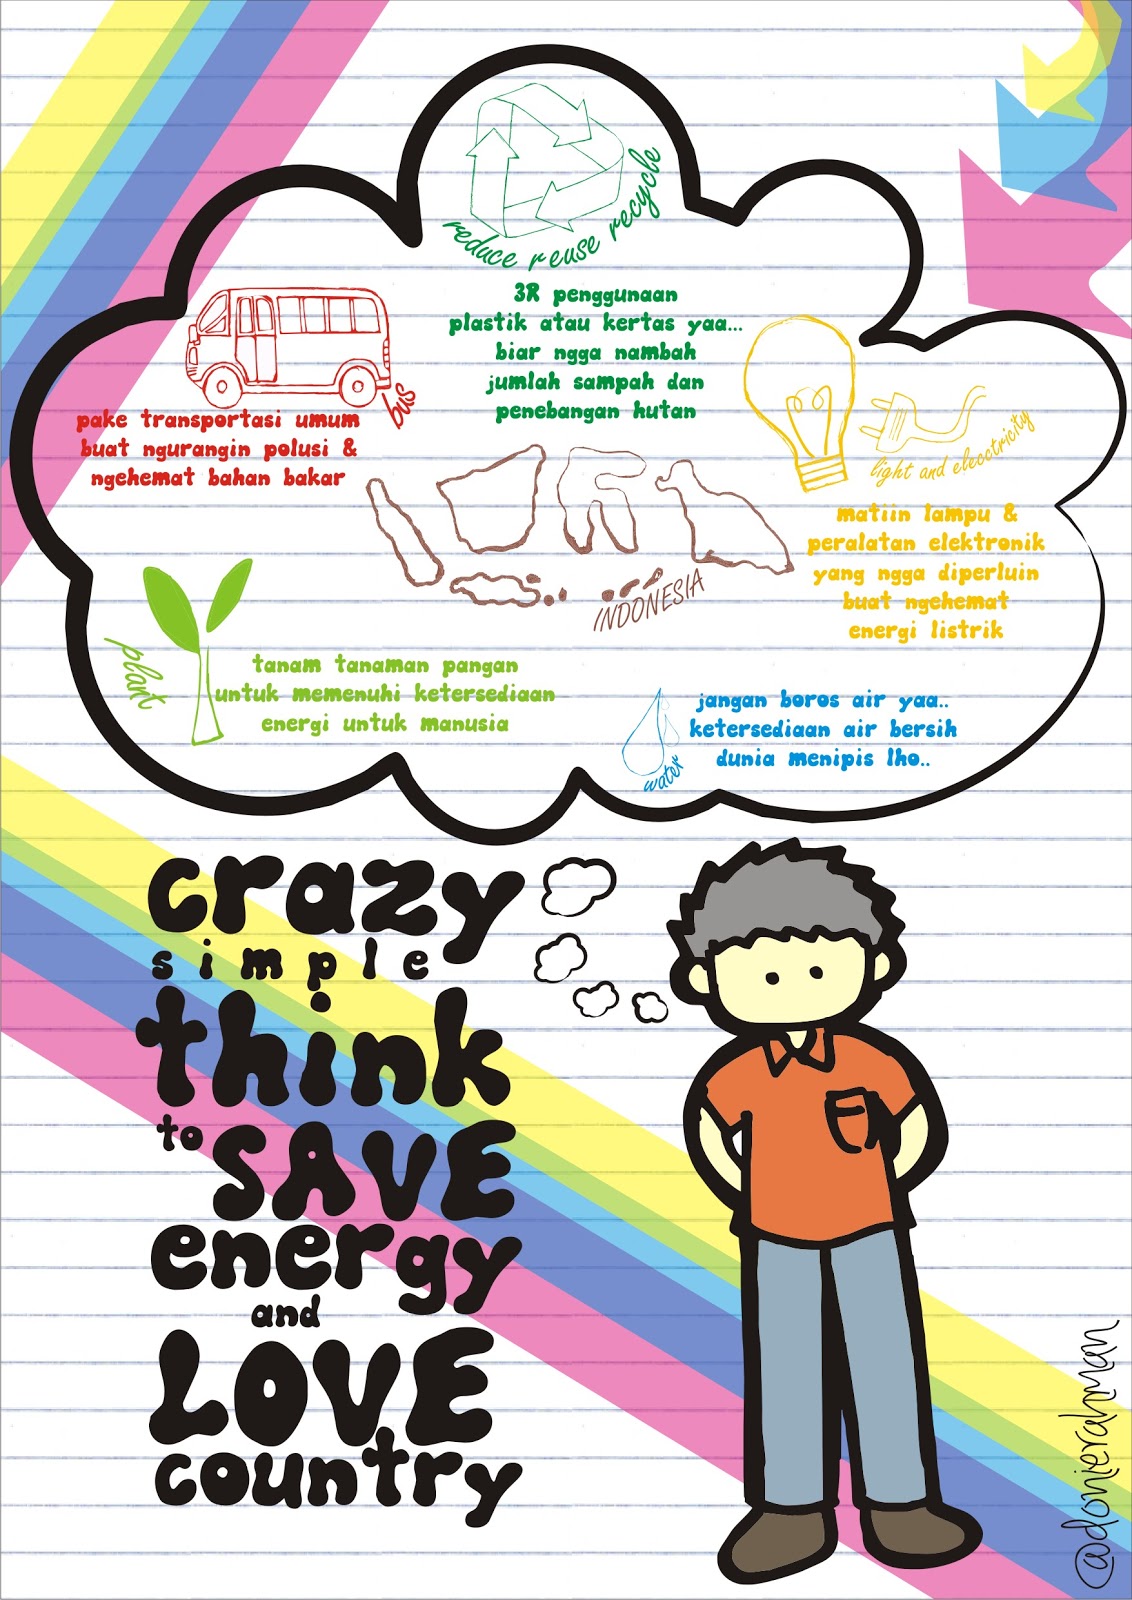 donie punya blog crazy simple think to save energy